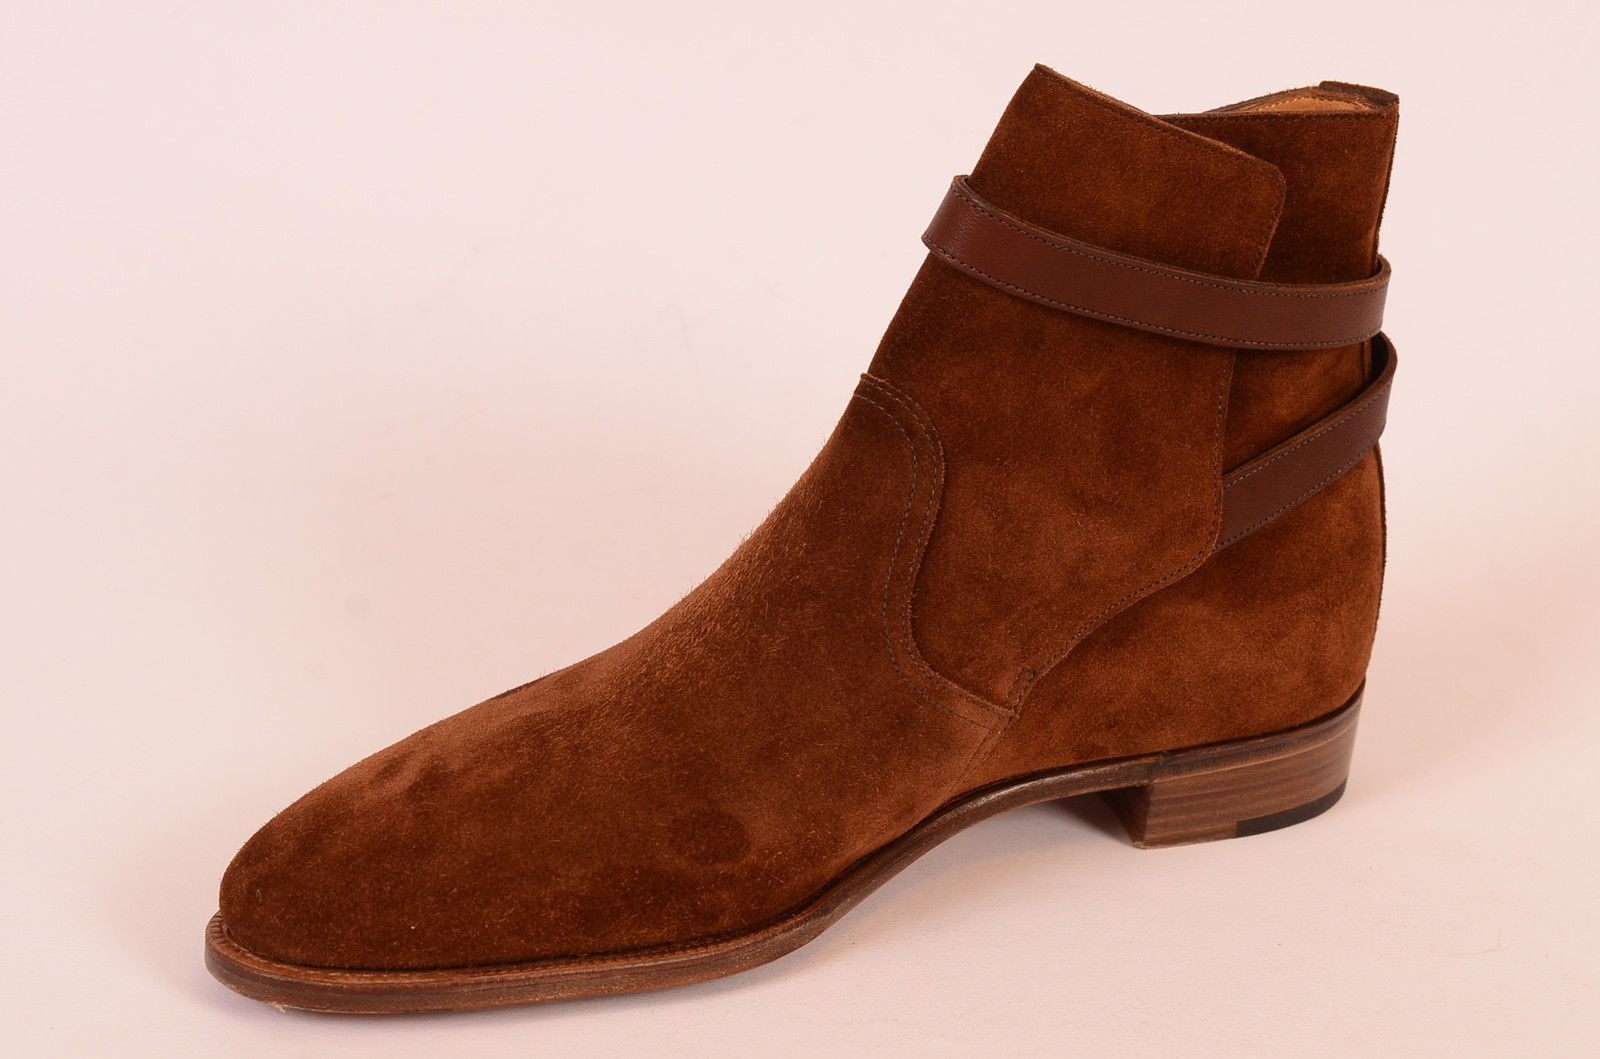 Handmade Brown jodhpurs Boots, Men Brown ankle Boots, Men Suede Leather ...